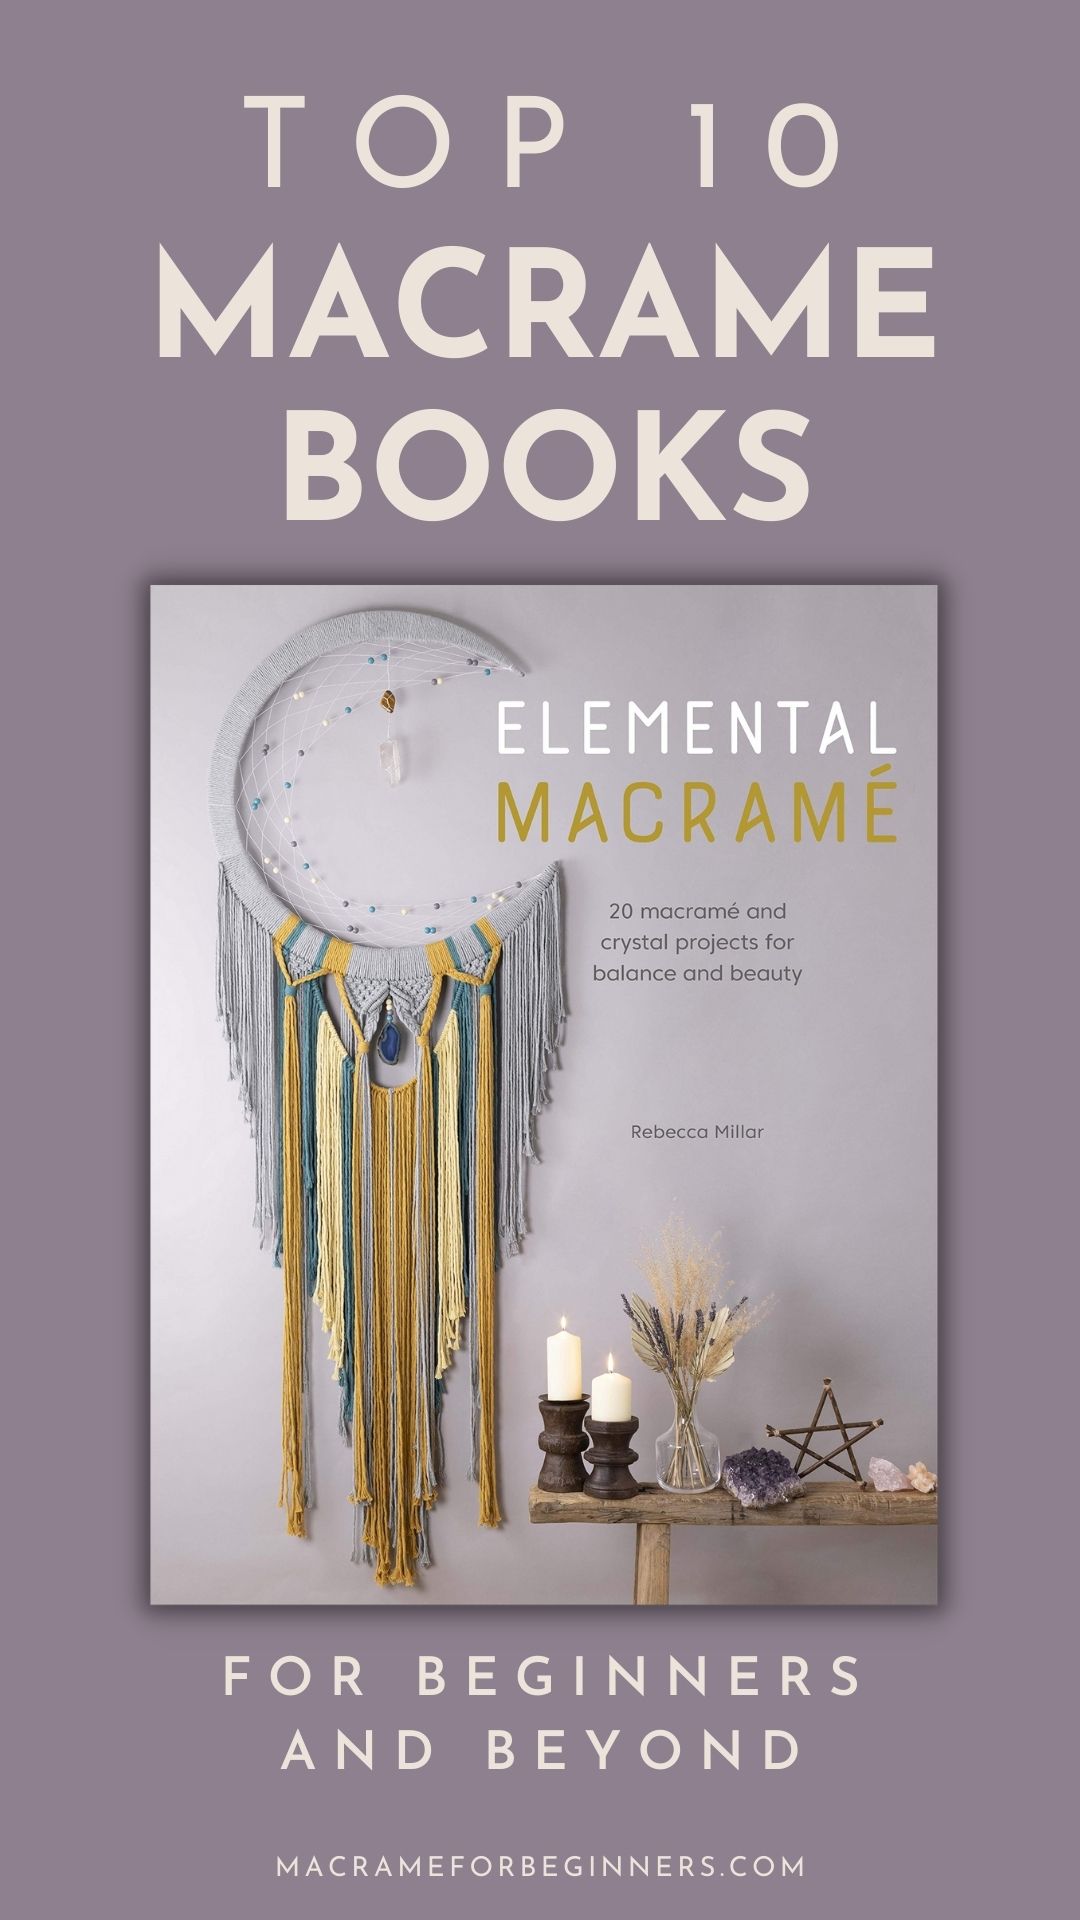 Best Macrame Books for Beginners and Beyond - Macrame for Beginners